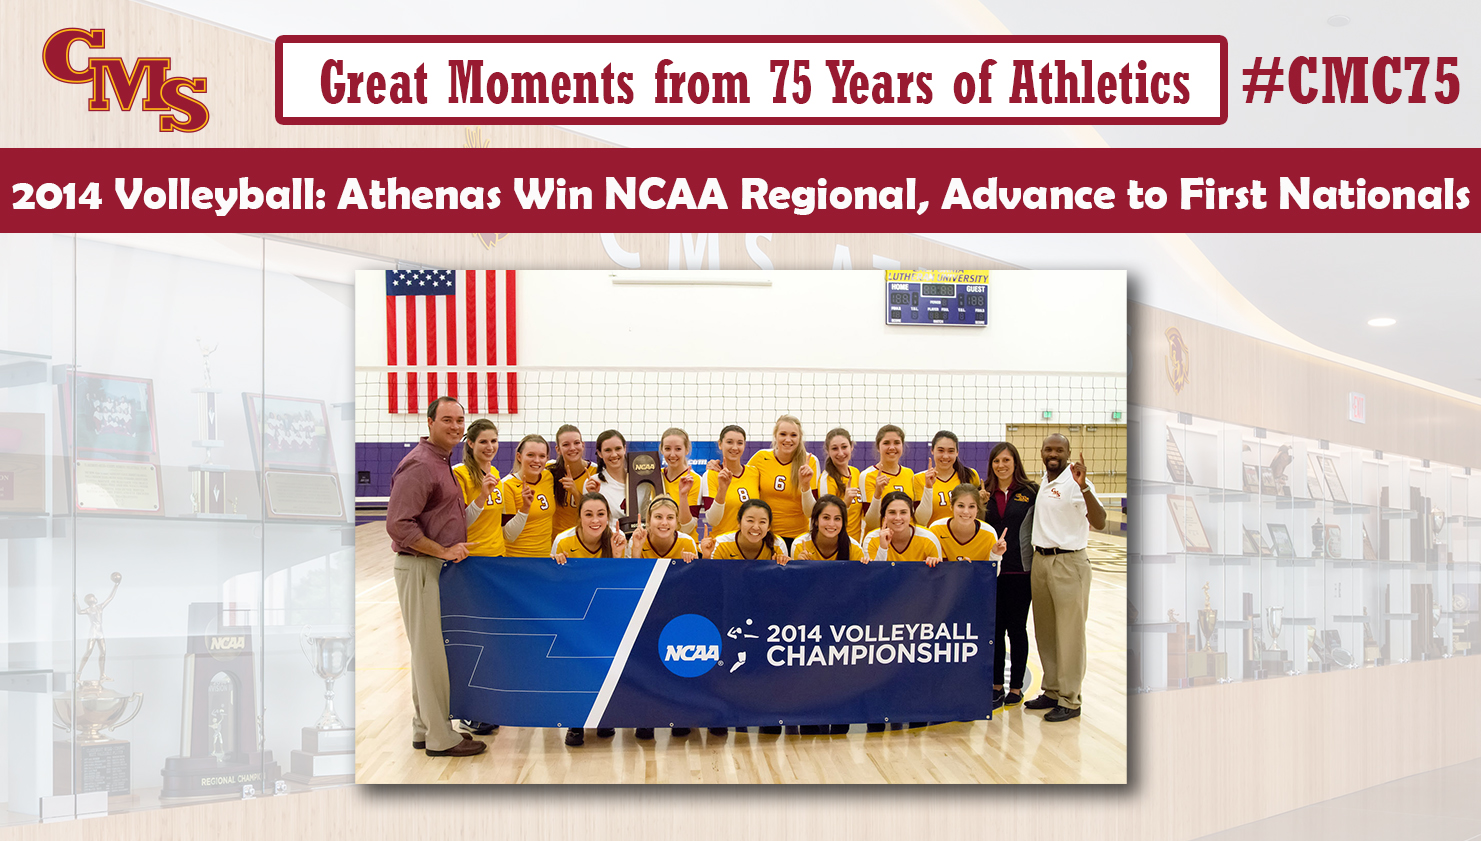 The 2014 volleyball team celebrating after winning the regionals. Words over the photo read: Great Moments from 75 Years of Athletics, 2014 Volleyball: Athenas Win NCAA Regional, Advance to First Nationals